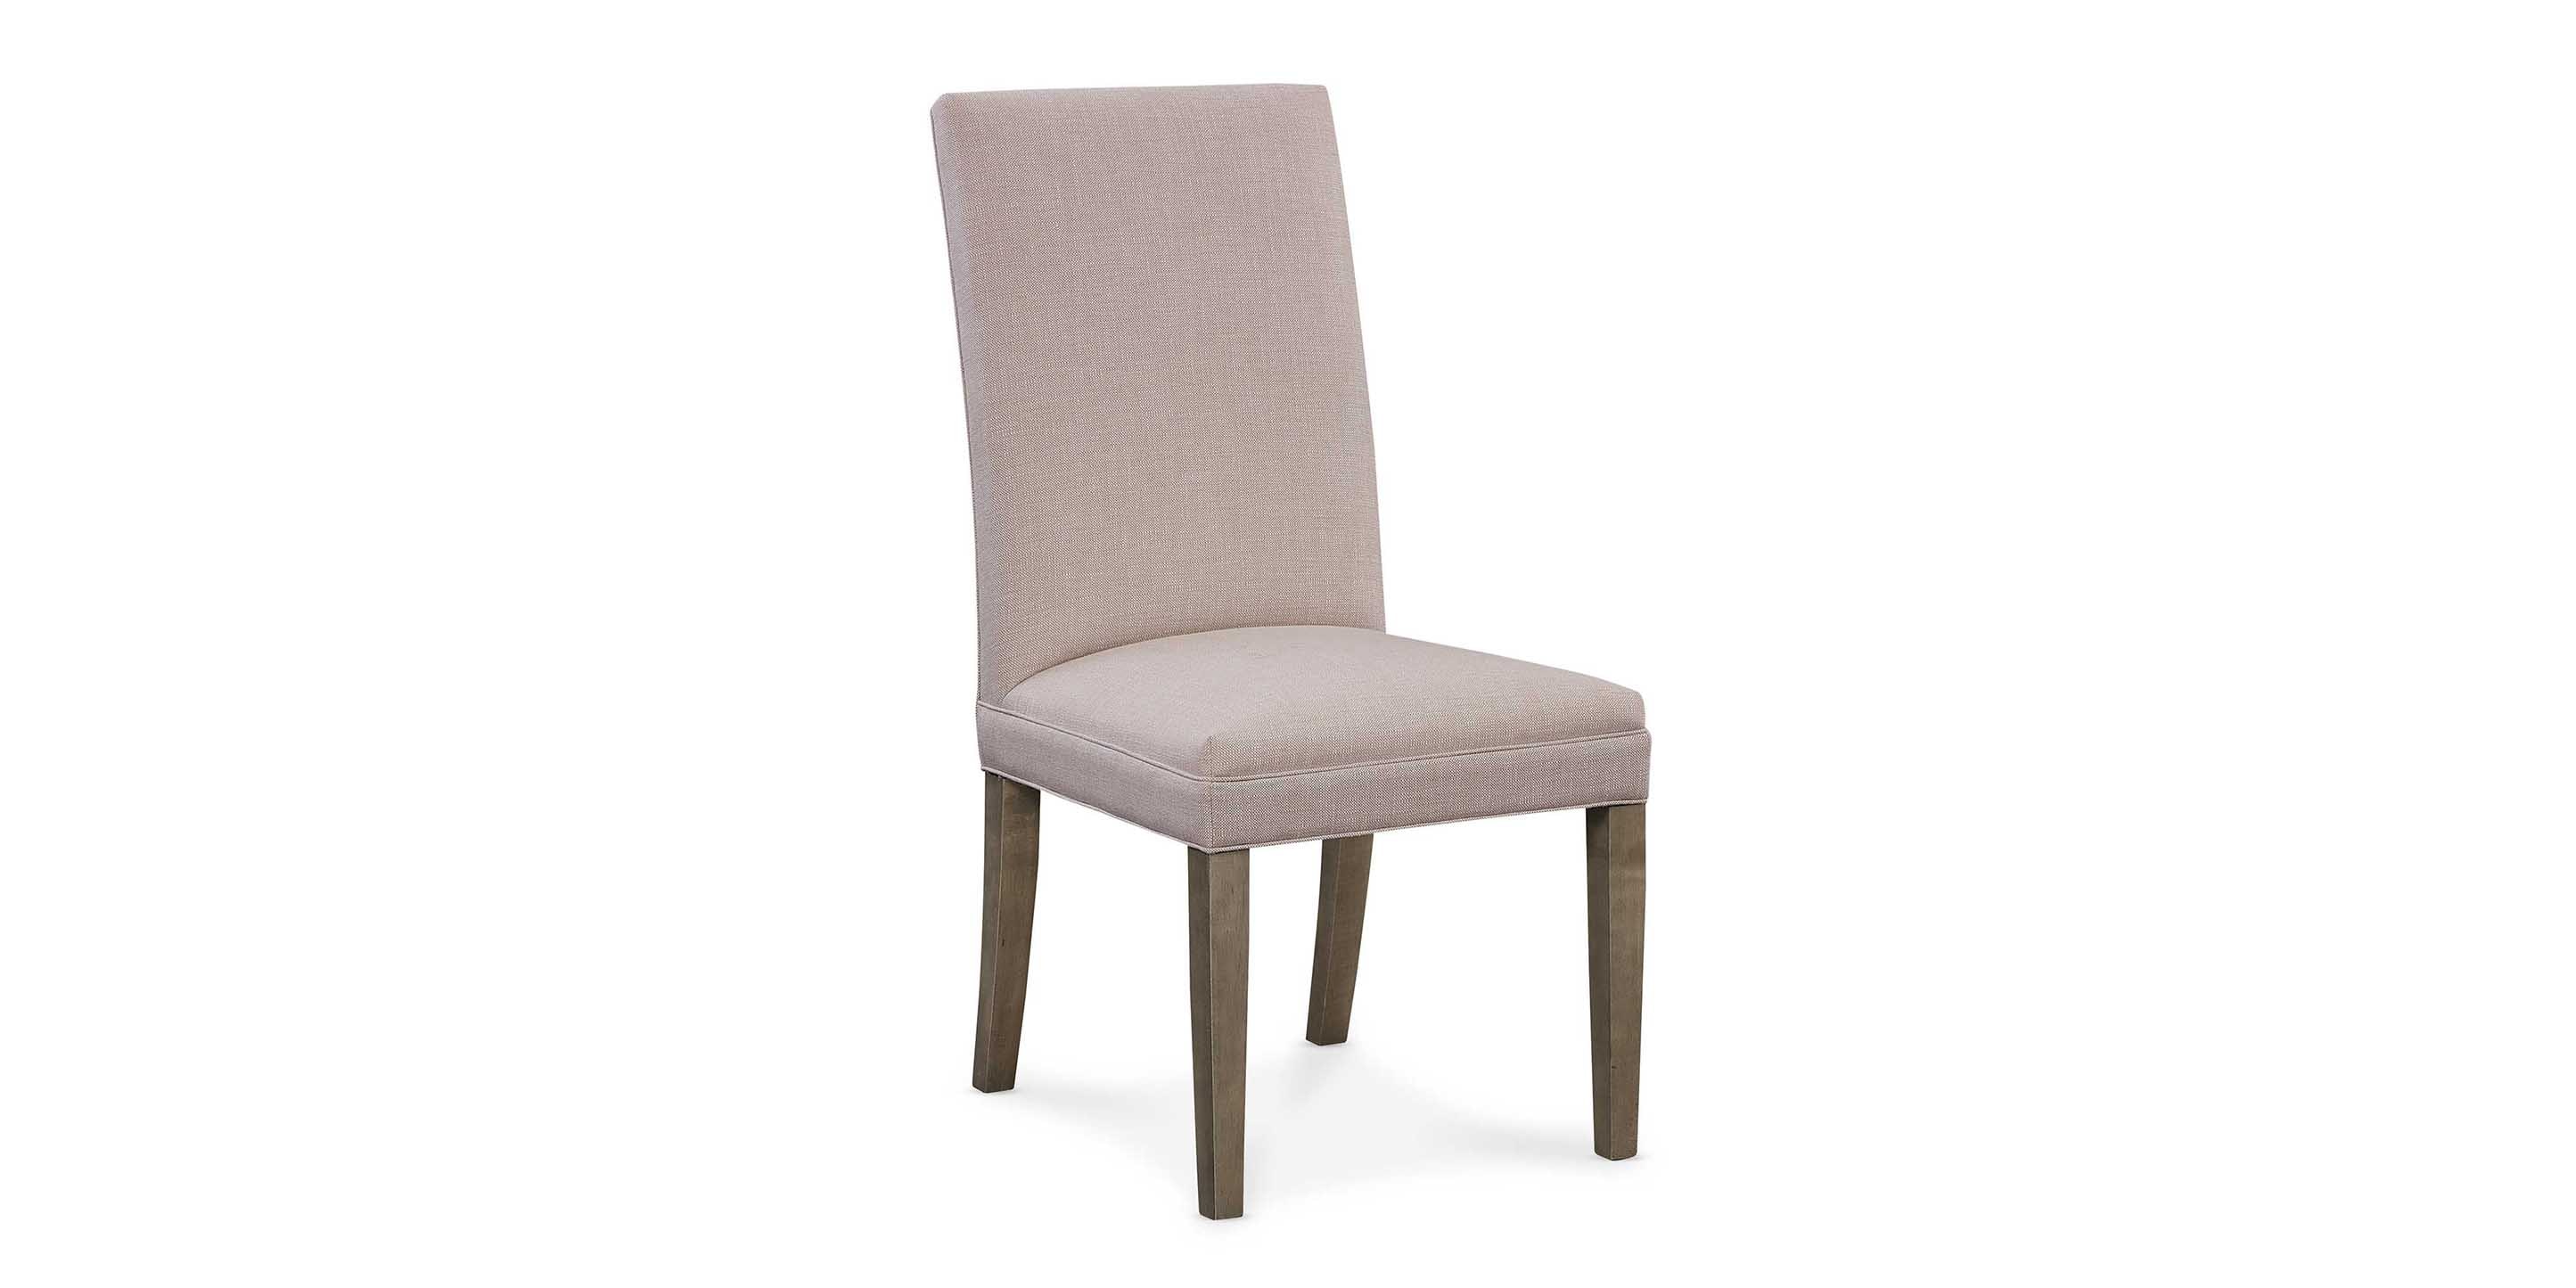 Marge Upholstered Dining Chair